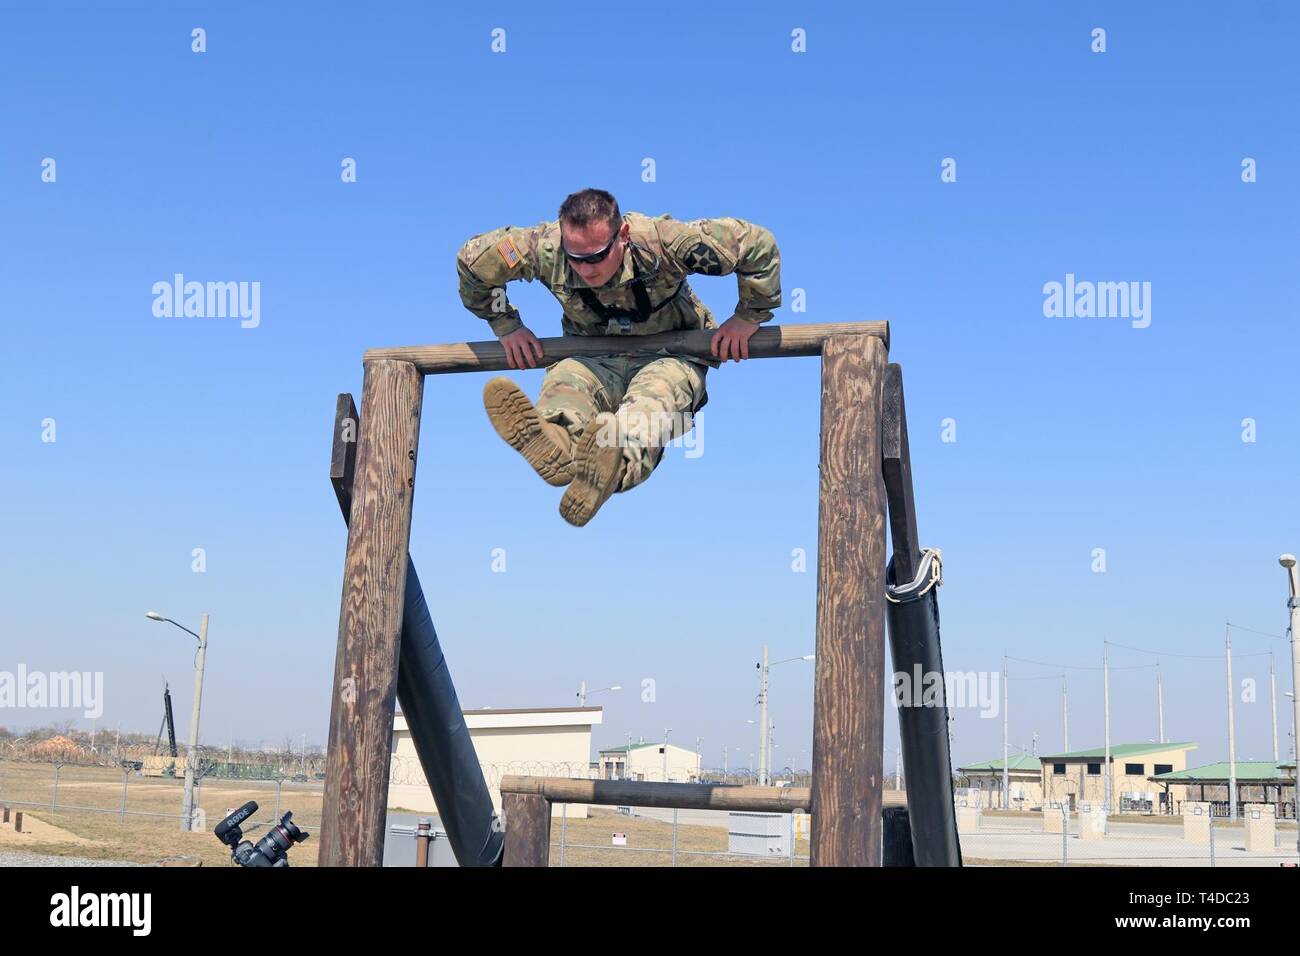 CAMP HUMPHREYS, Republic of Korea - Capt. Colby S. Miller, Phenix City, Alabama native, infantry officer, 2nd Infantry Division/ROK-U.S. Combined Division, negotiates an obstacle course, March 22, in preparation for the 2019 Best Ranger Competition taking place at Fort Benning, Georgia April 12-14. Miller and teammate, Capt. Jonathan J. Kaminski, Atlanta, Georgia native, field artillery officer, 2nd Combat Aviation Brigade, will compete as a two-person team against more than 50 other Ranger teams. Stock Photo